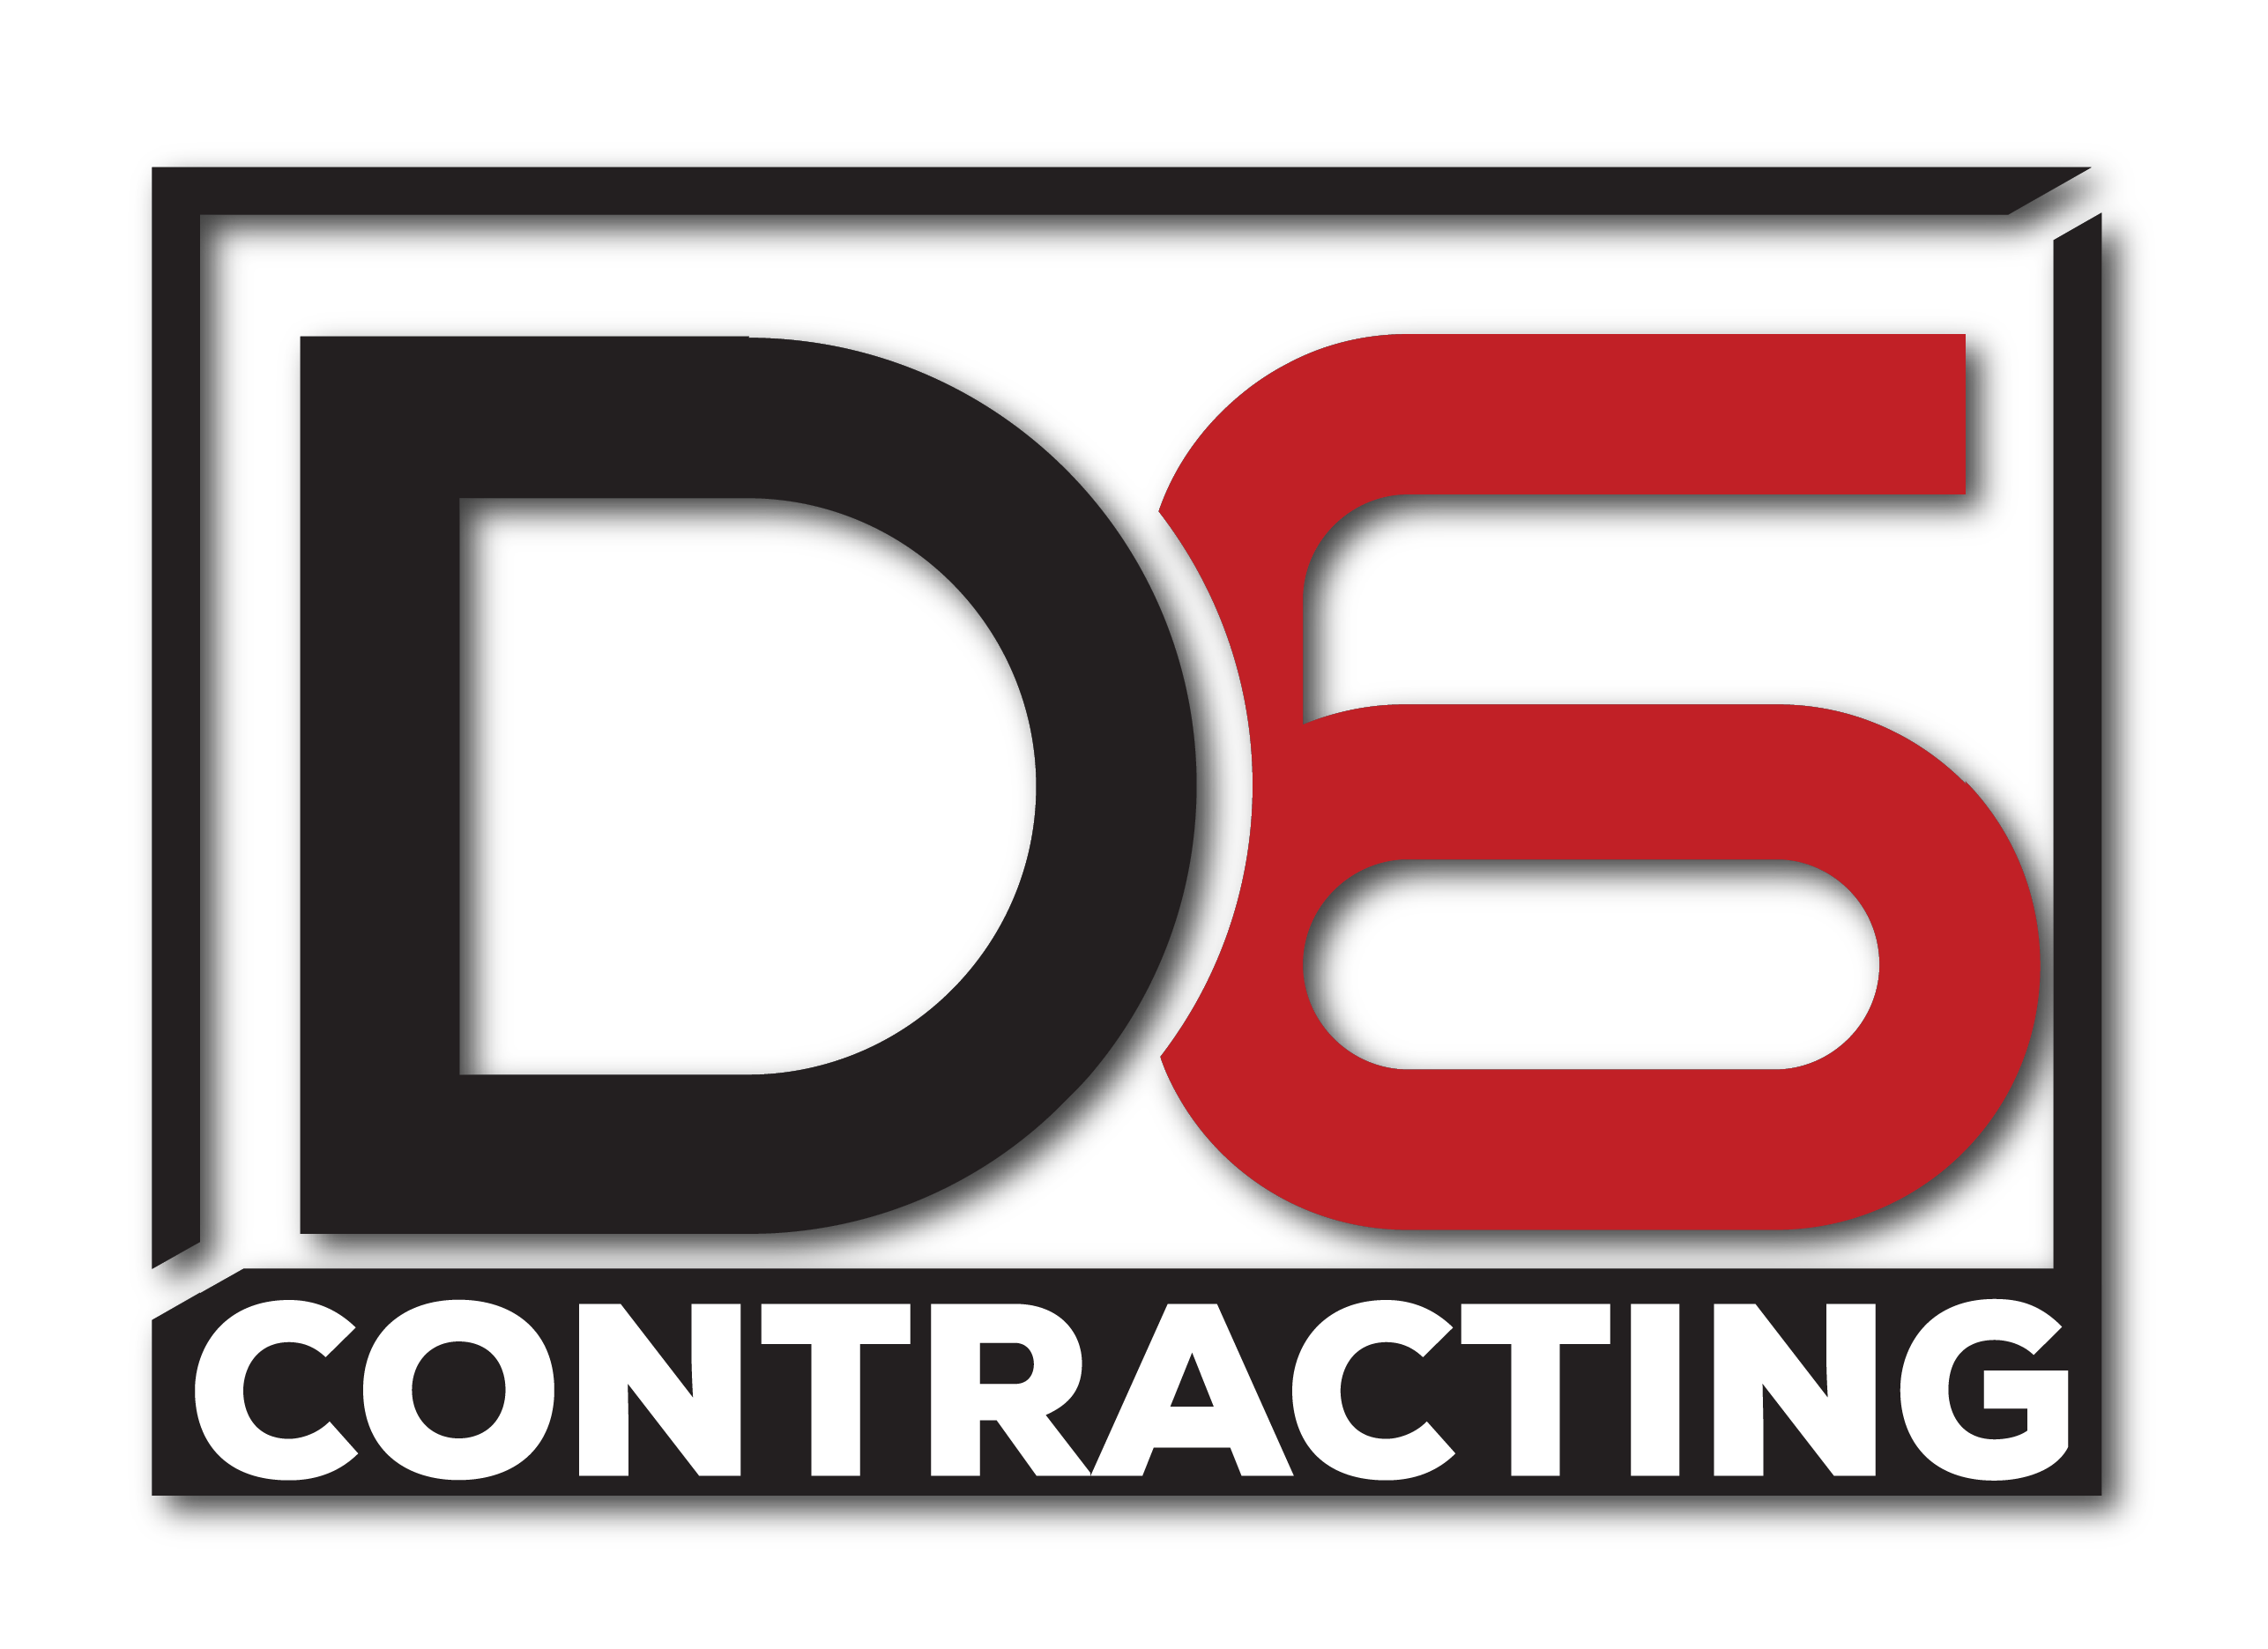 D6 Contracting